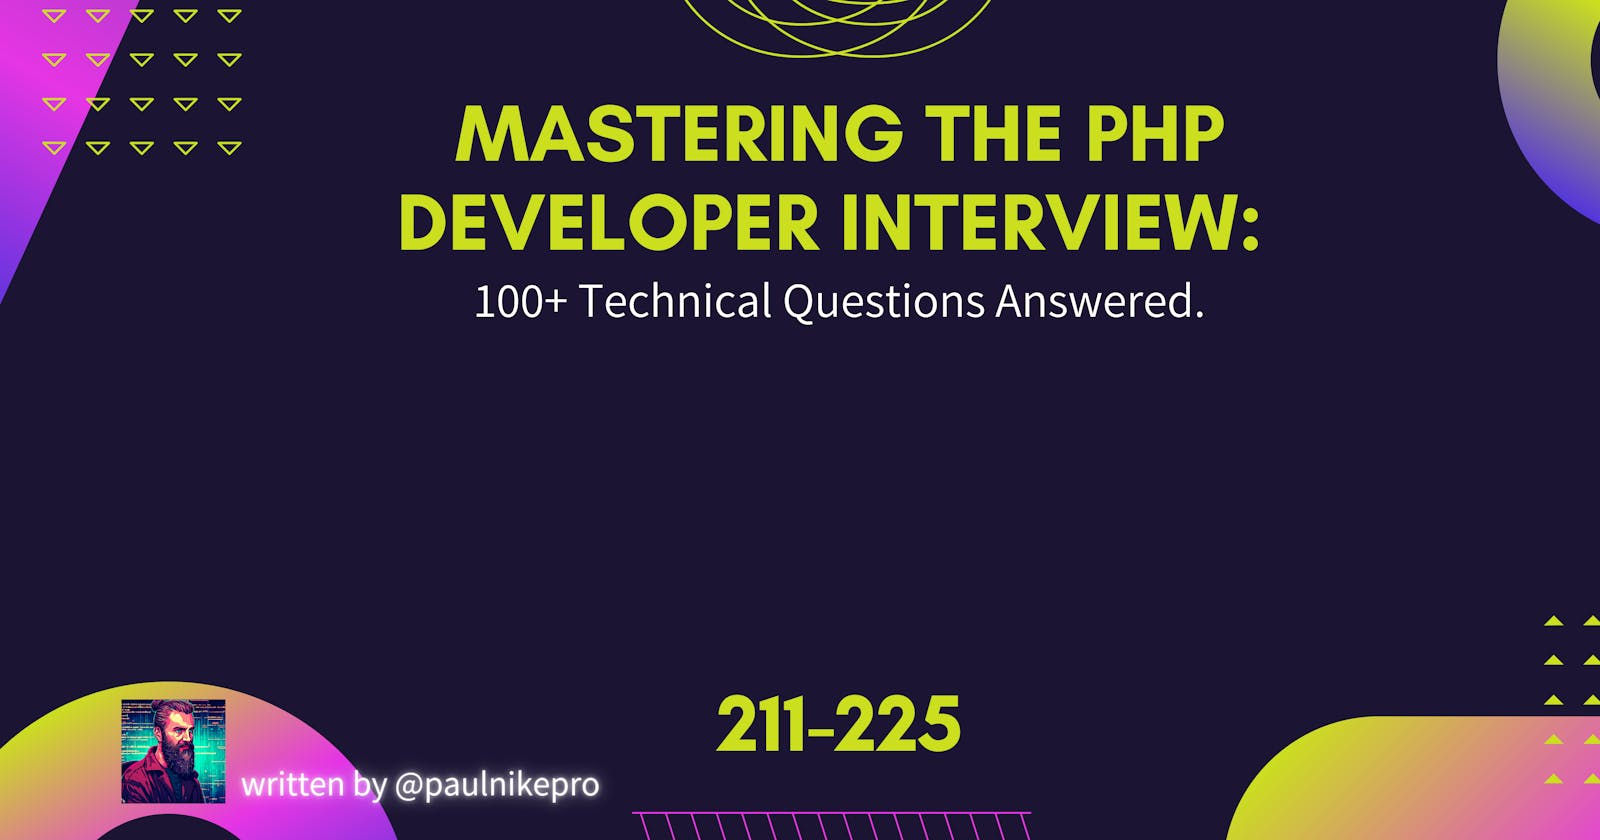 Mastering the PHP Developer Interview: 100+ Technical Questions Answered. 211-225.